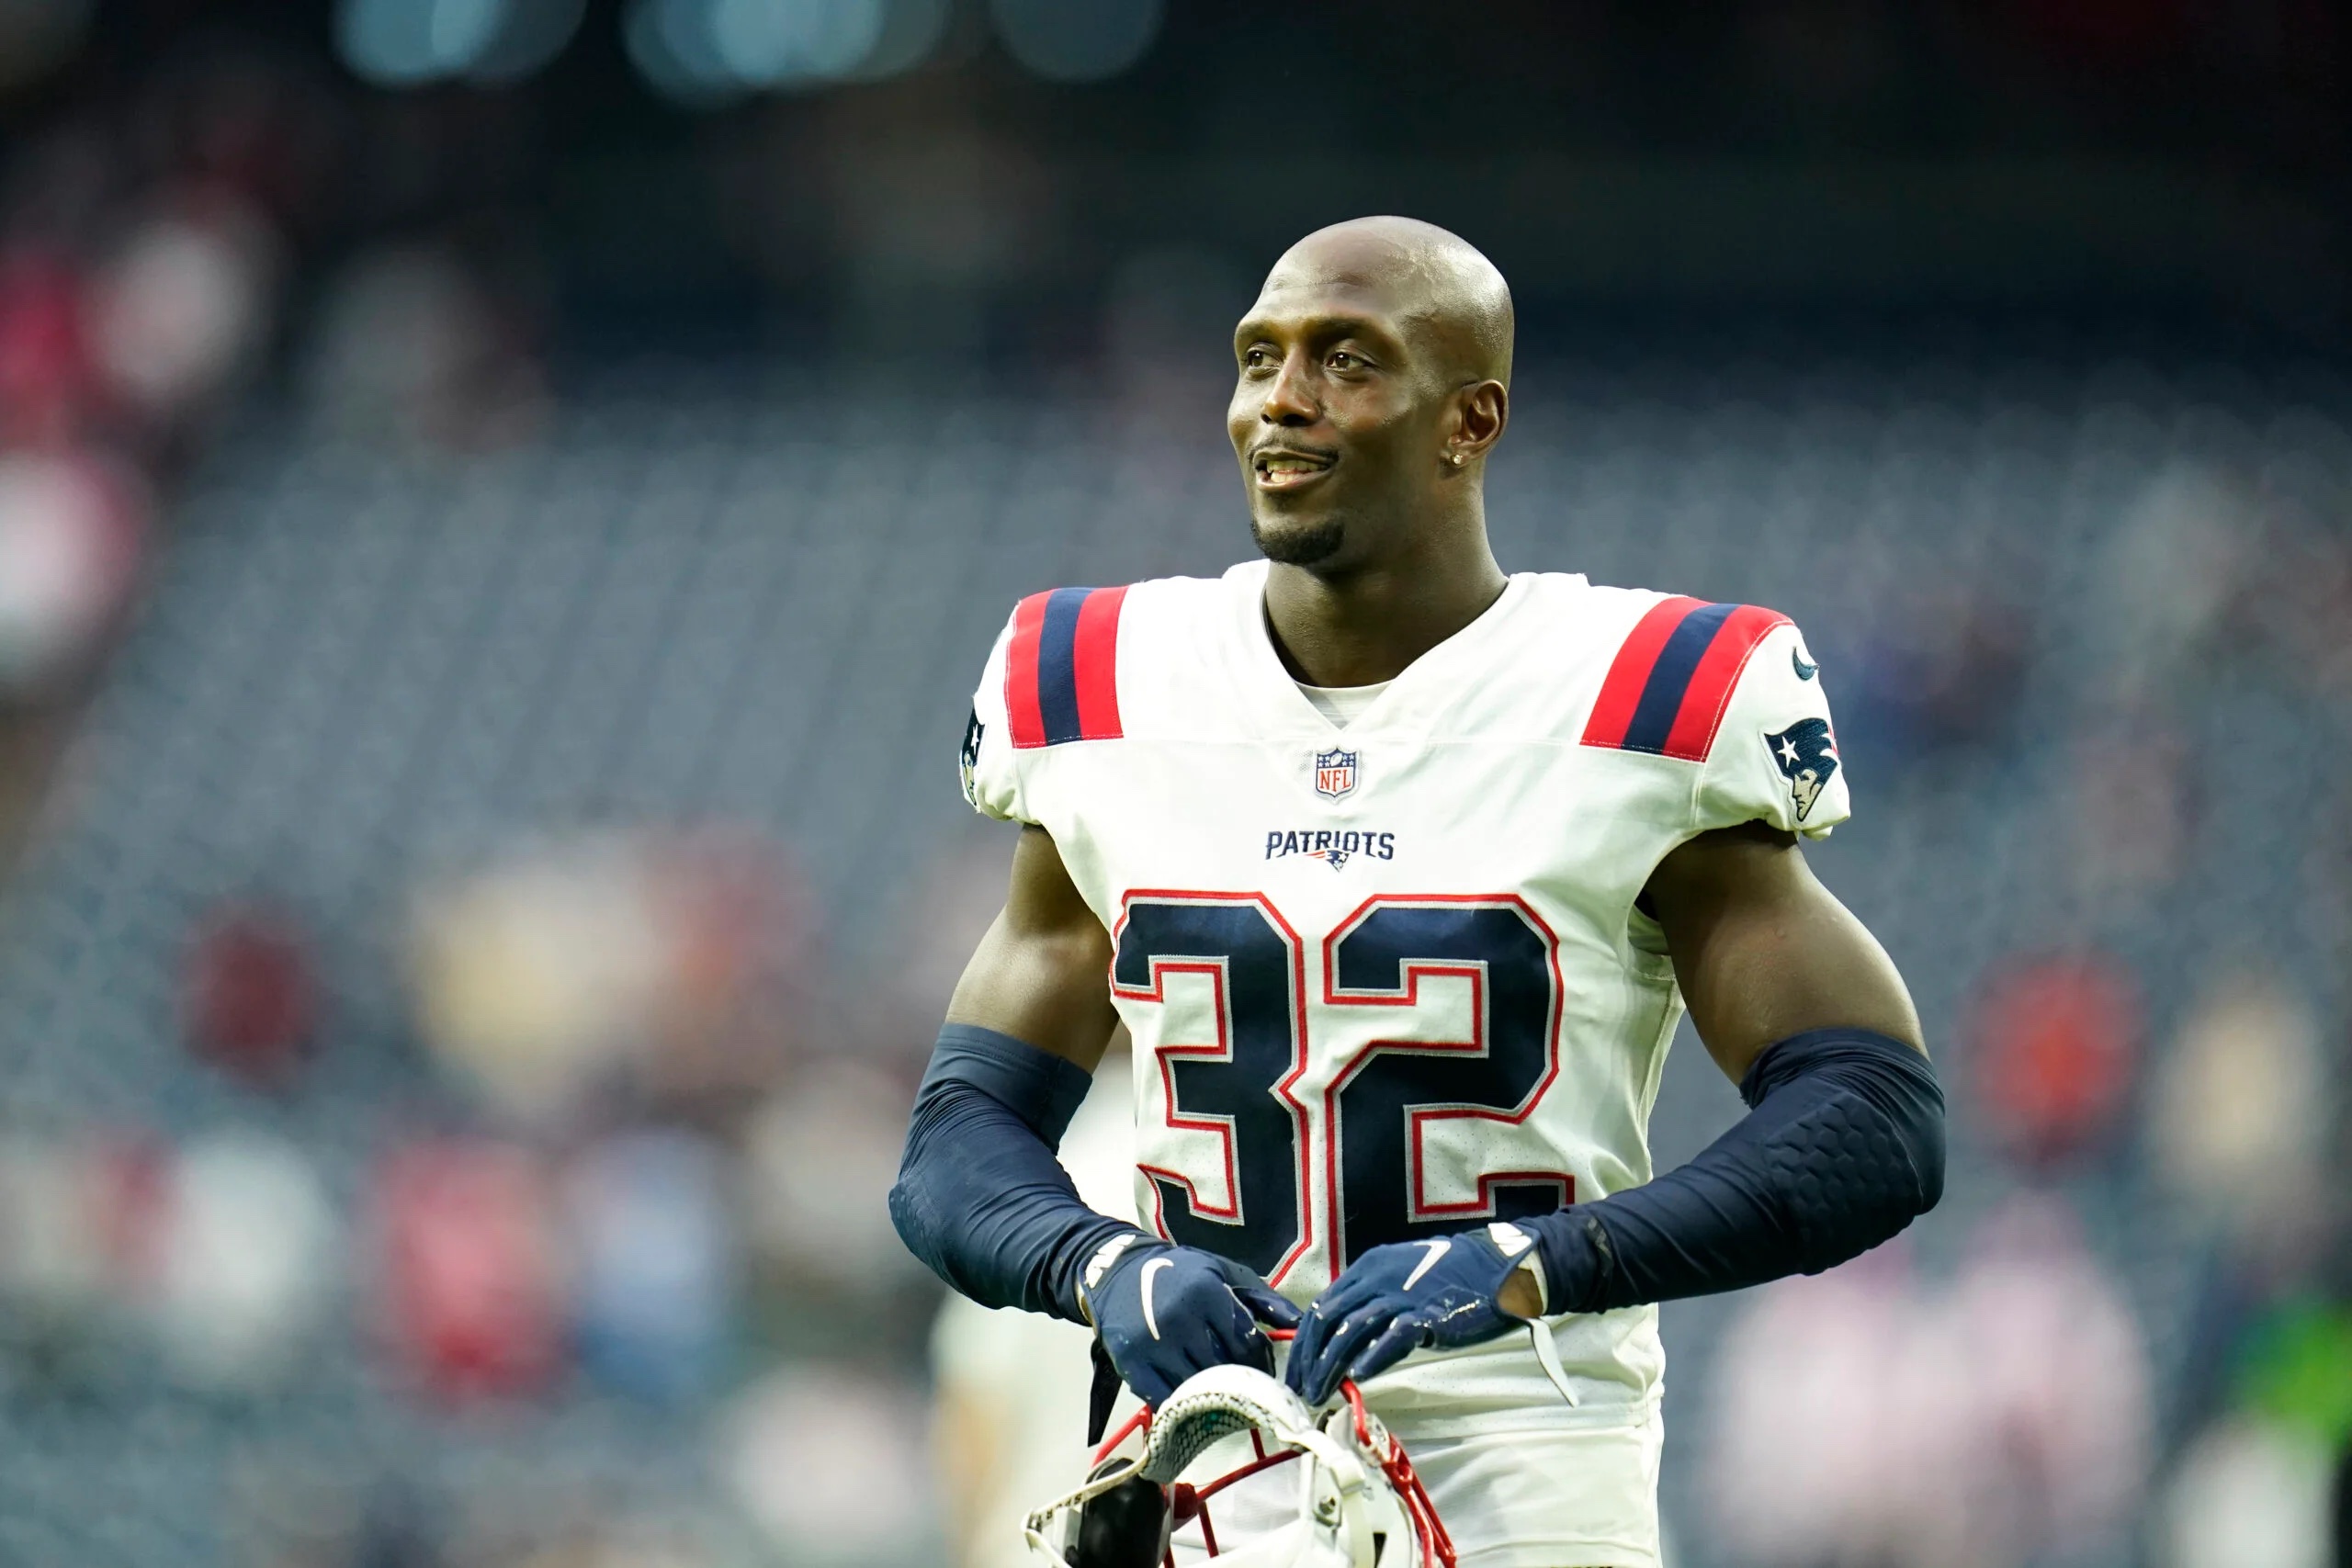 New England Patriots’ secondary has a stiff test without Devin McCourty.